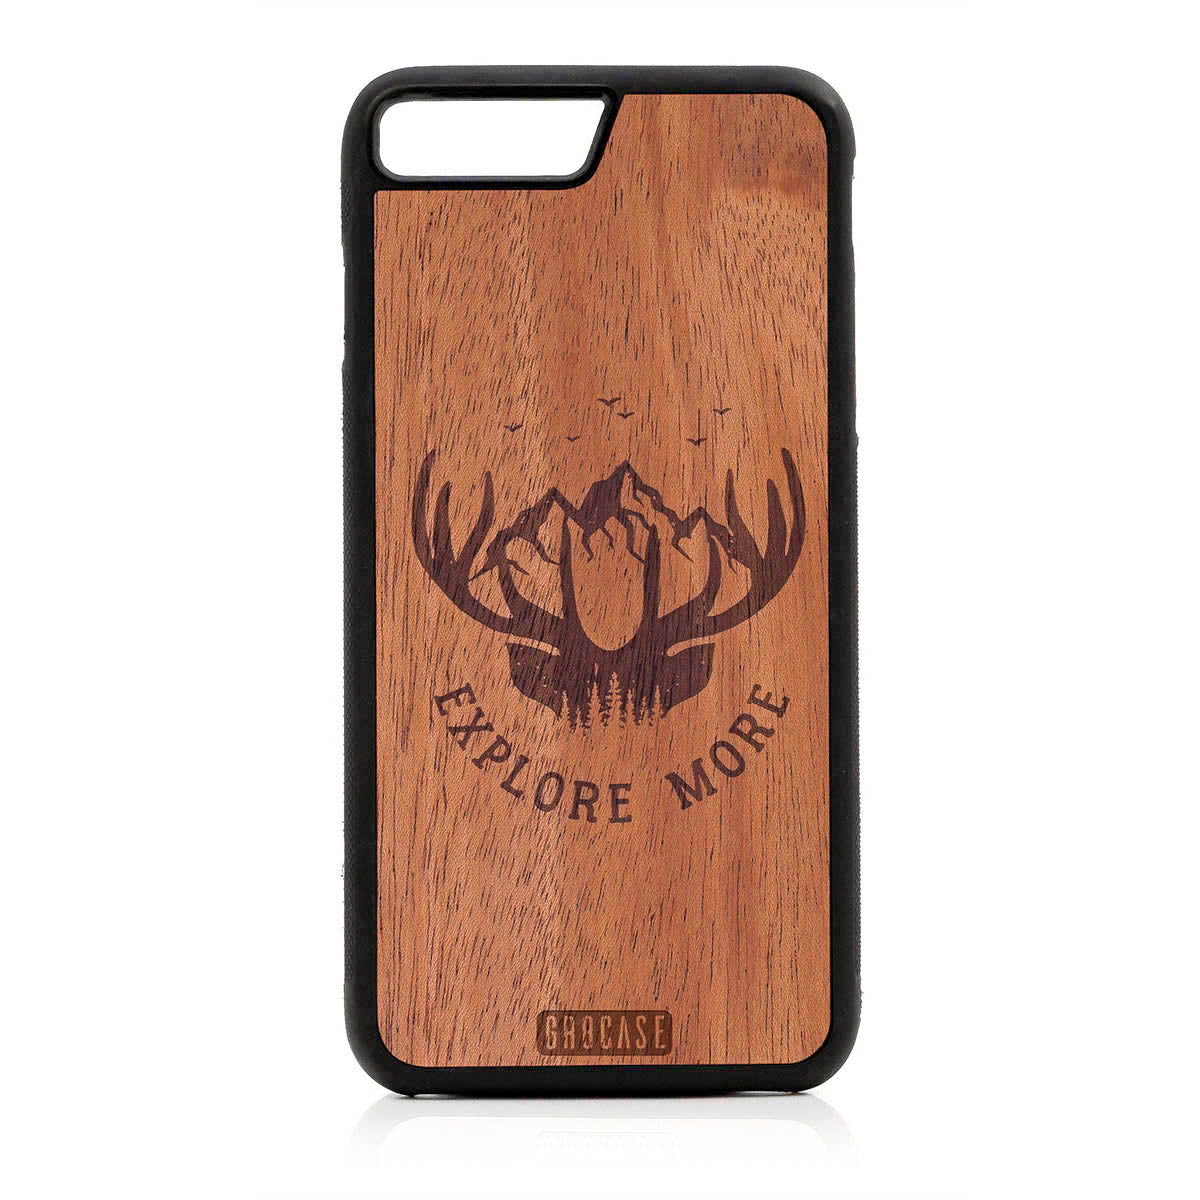 Explore More (Forest, Mountains & Antlers) Design Wood Case For iPhone 7 Plus / 8 Plus by GR8CASE